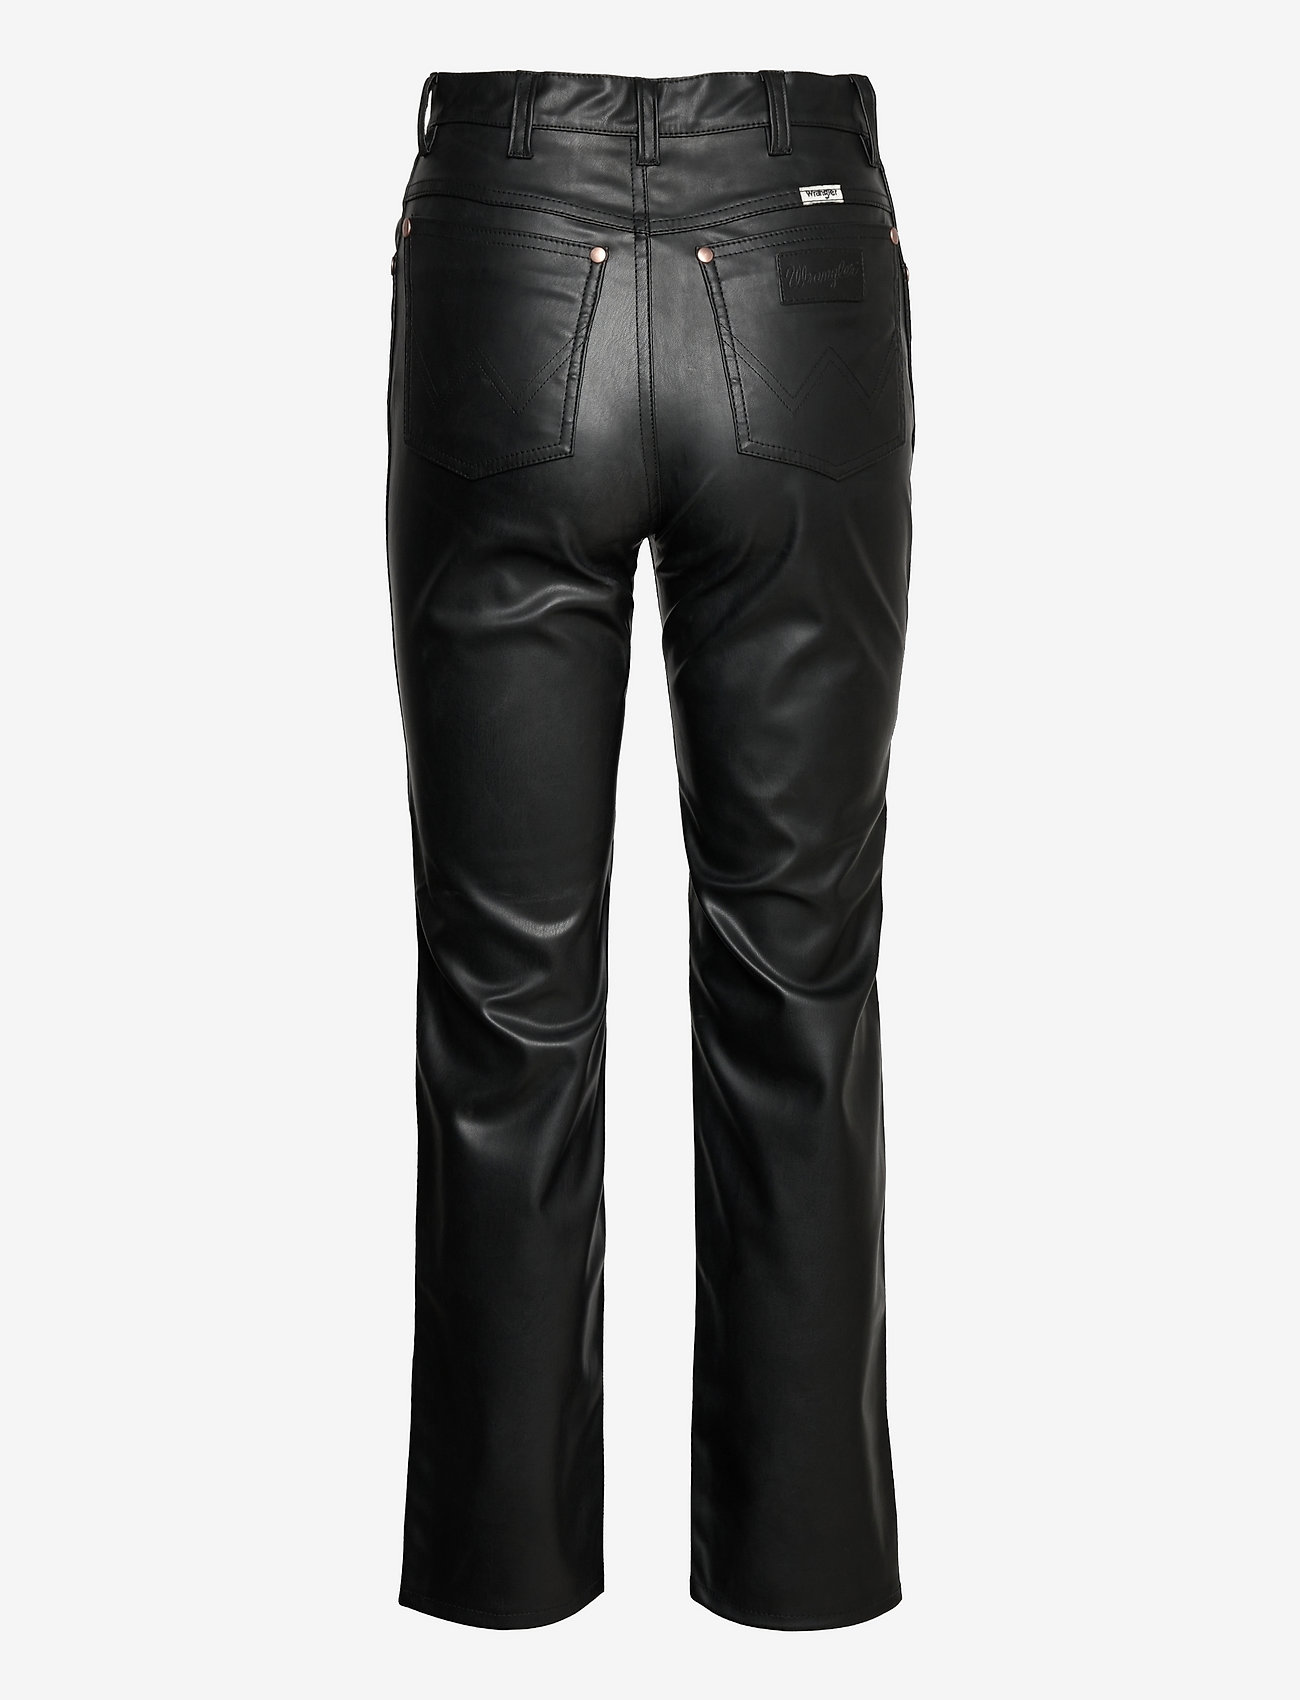 Wrangler Wild West - Leather trousers 